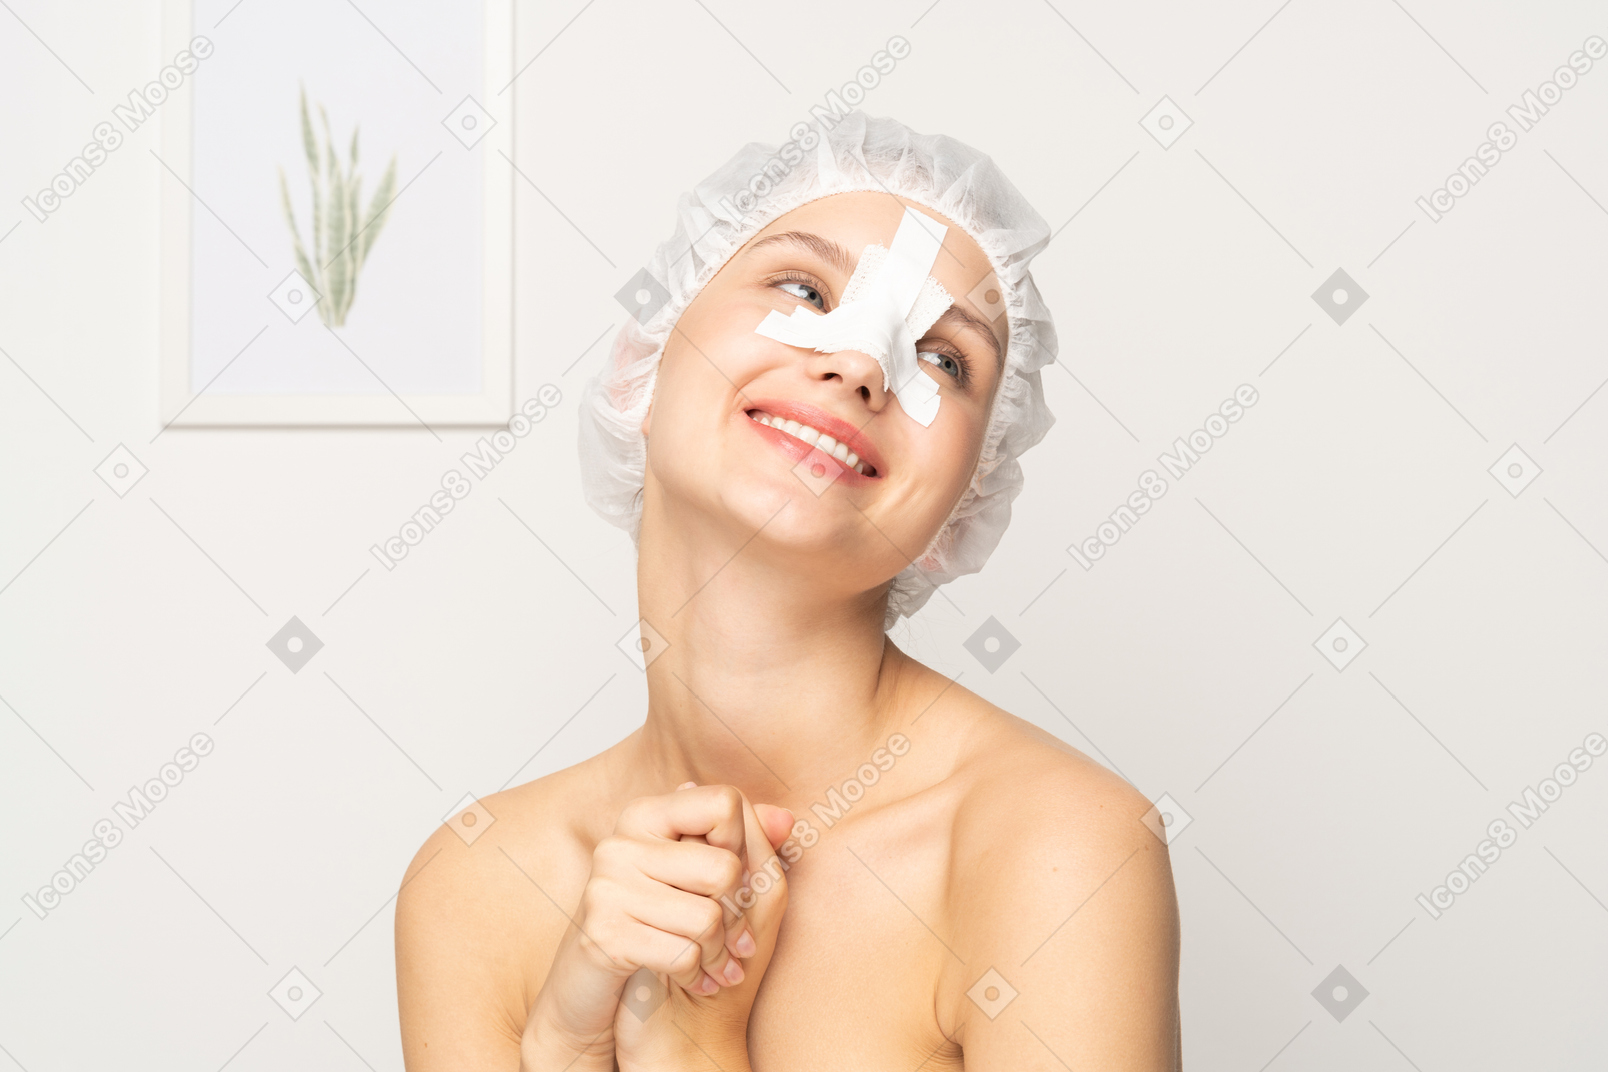 Smiling female patient with bandage on her nose